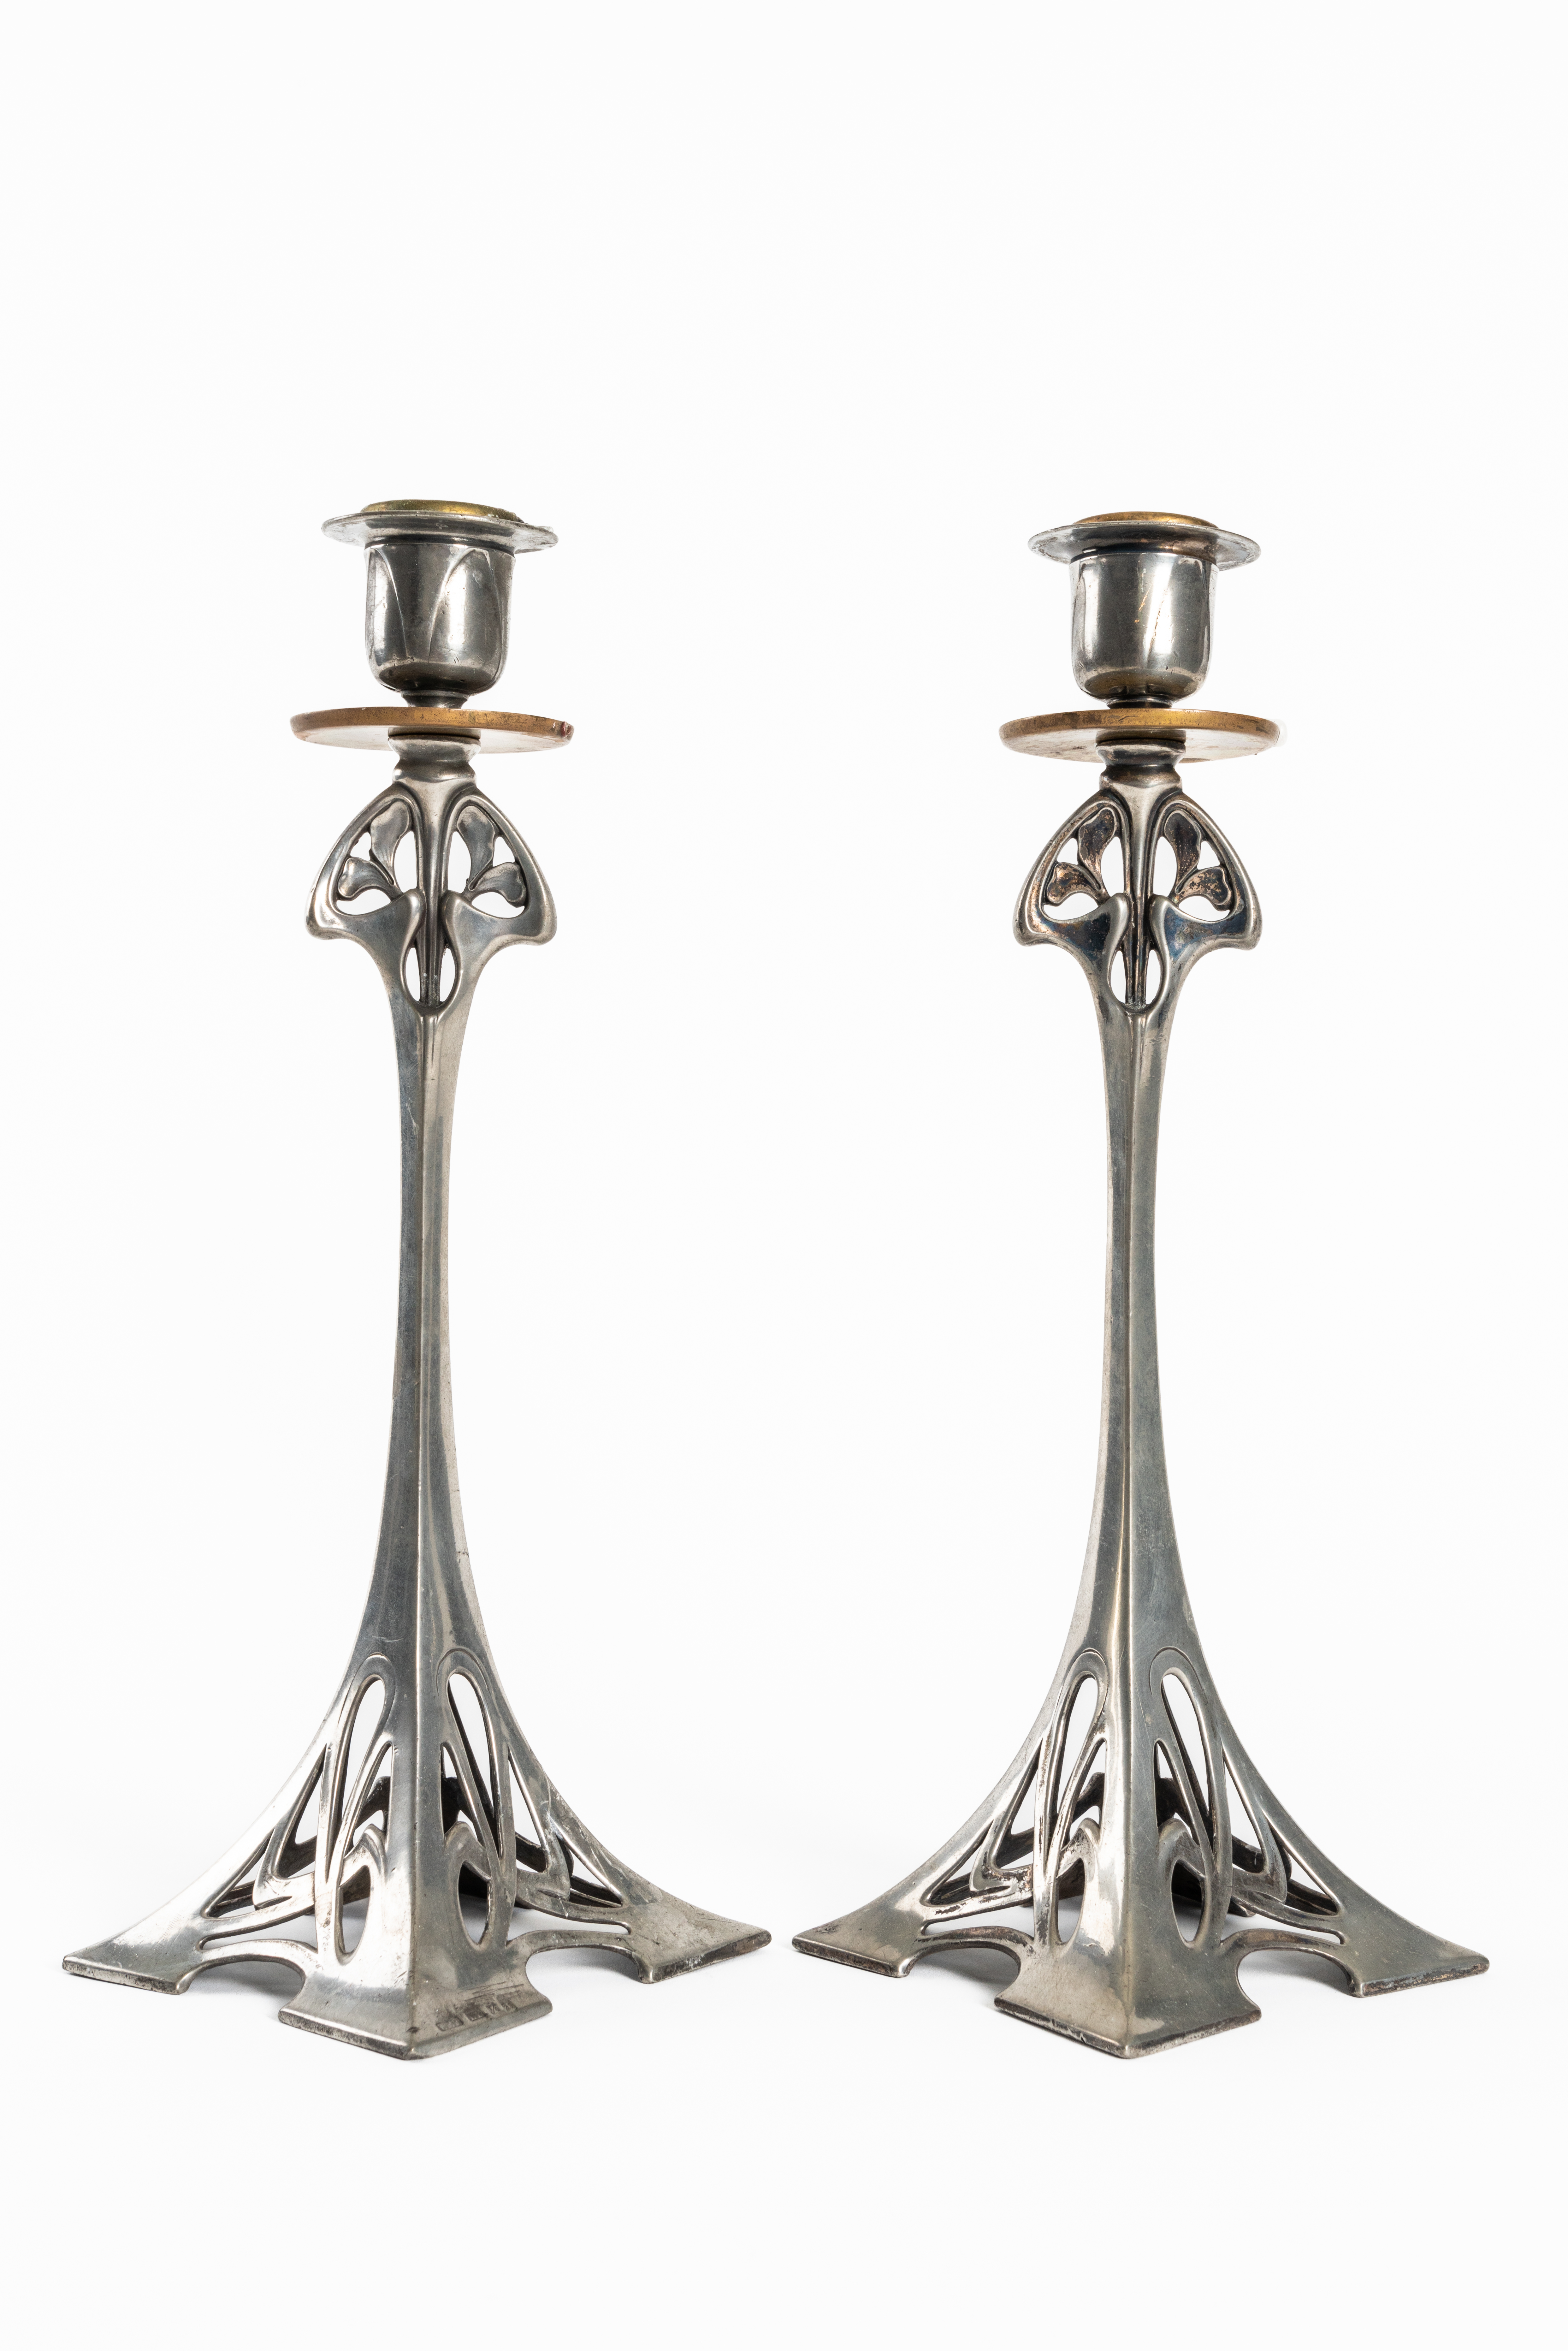 A PAIR OF WMF PEWTER ART NOUVEAU CANDLESTICKS AND THREE TUDRIC PEWTER PIN TRAYS AFTER A DESIGN... - Image 8 of 8